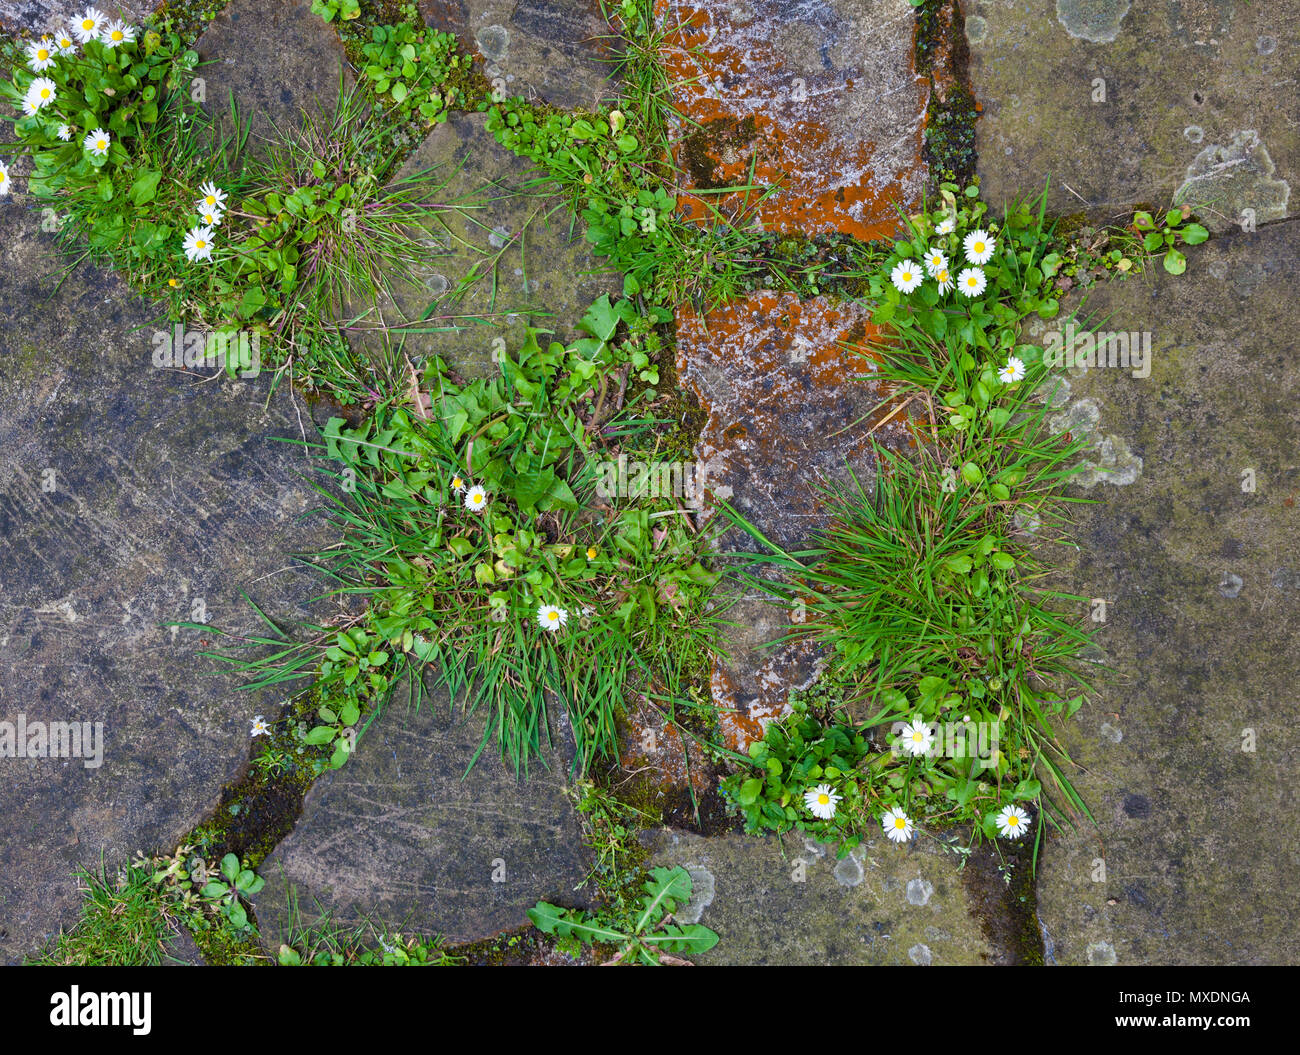 Daisies and other flora in gaps between crazy paving. Stock Photo